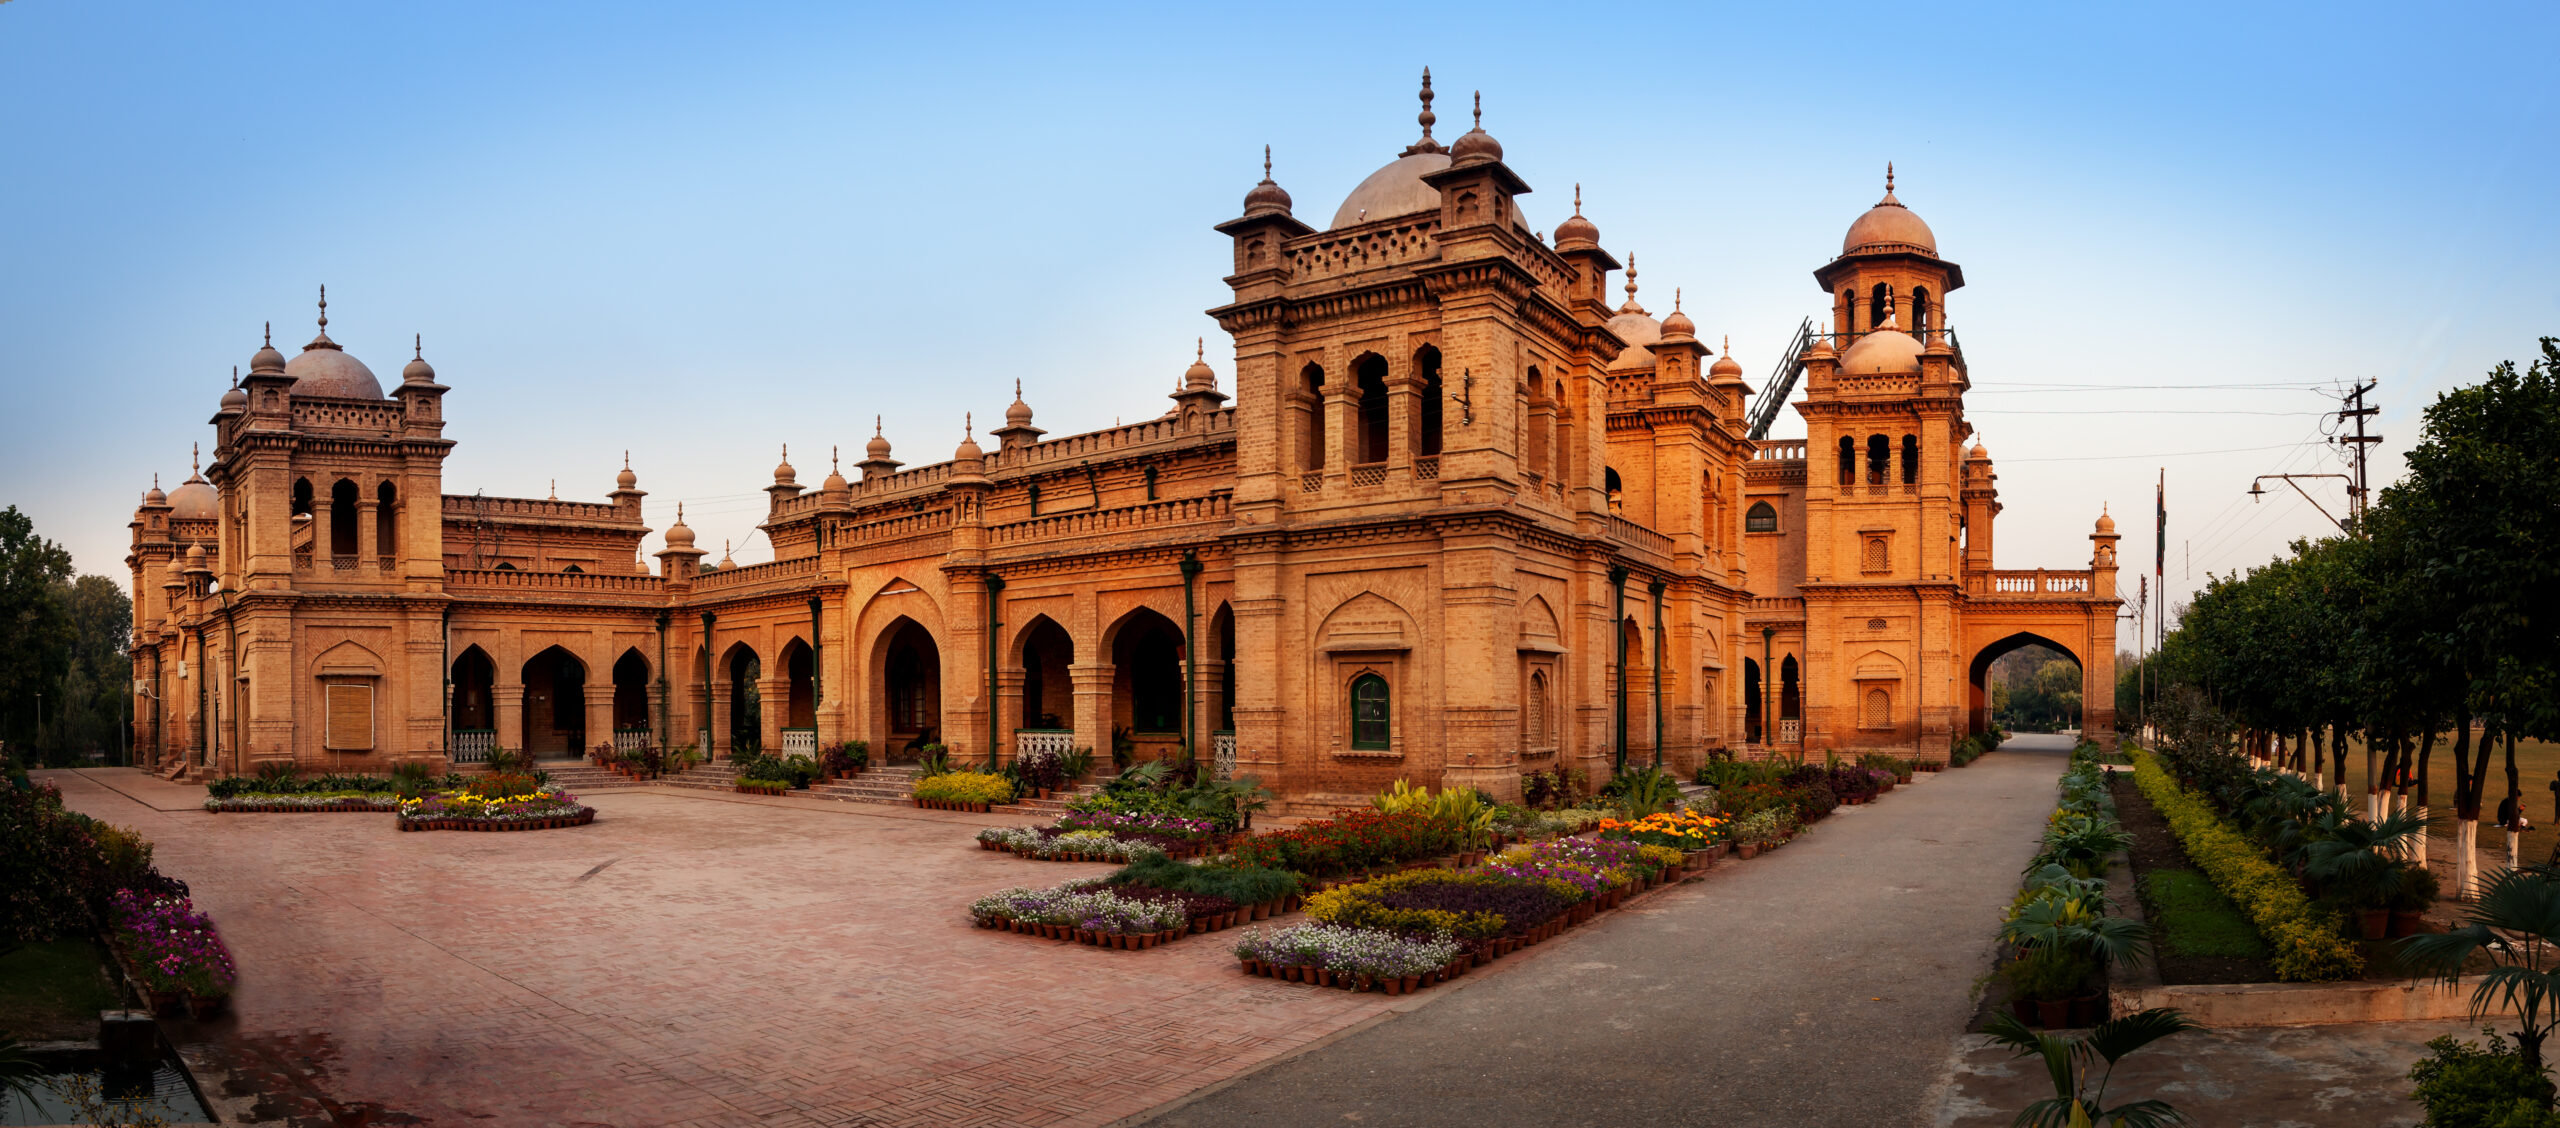 Islamia College is a renowned educational institution located in the city of Peshawar in the Khyber Pakhtunkhwa province of Pakistan.